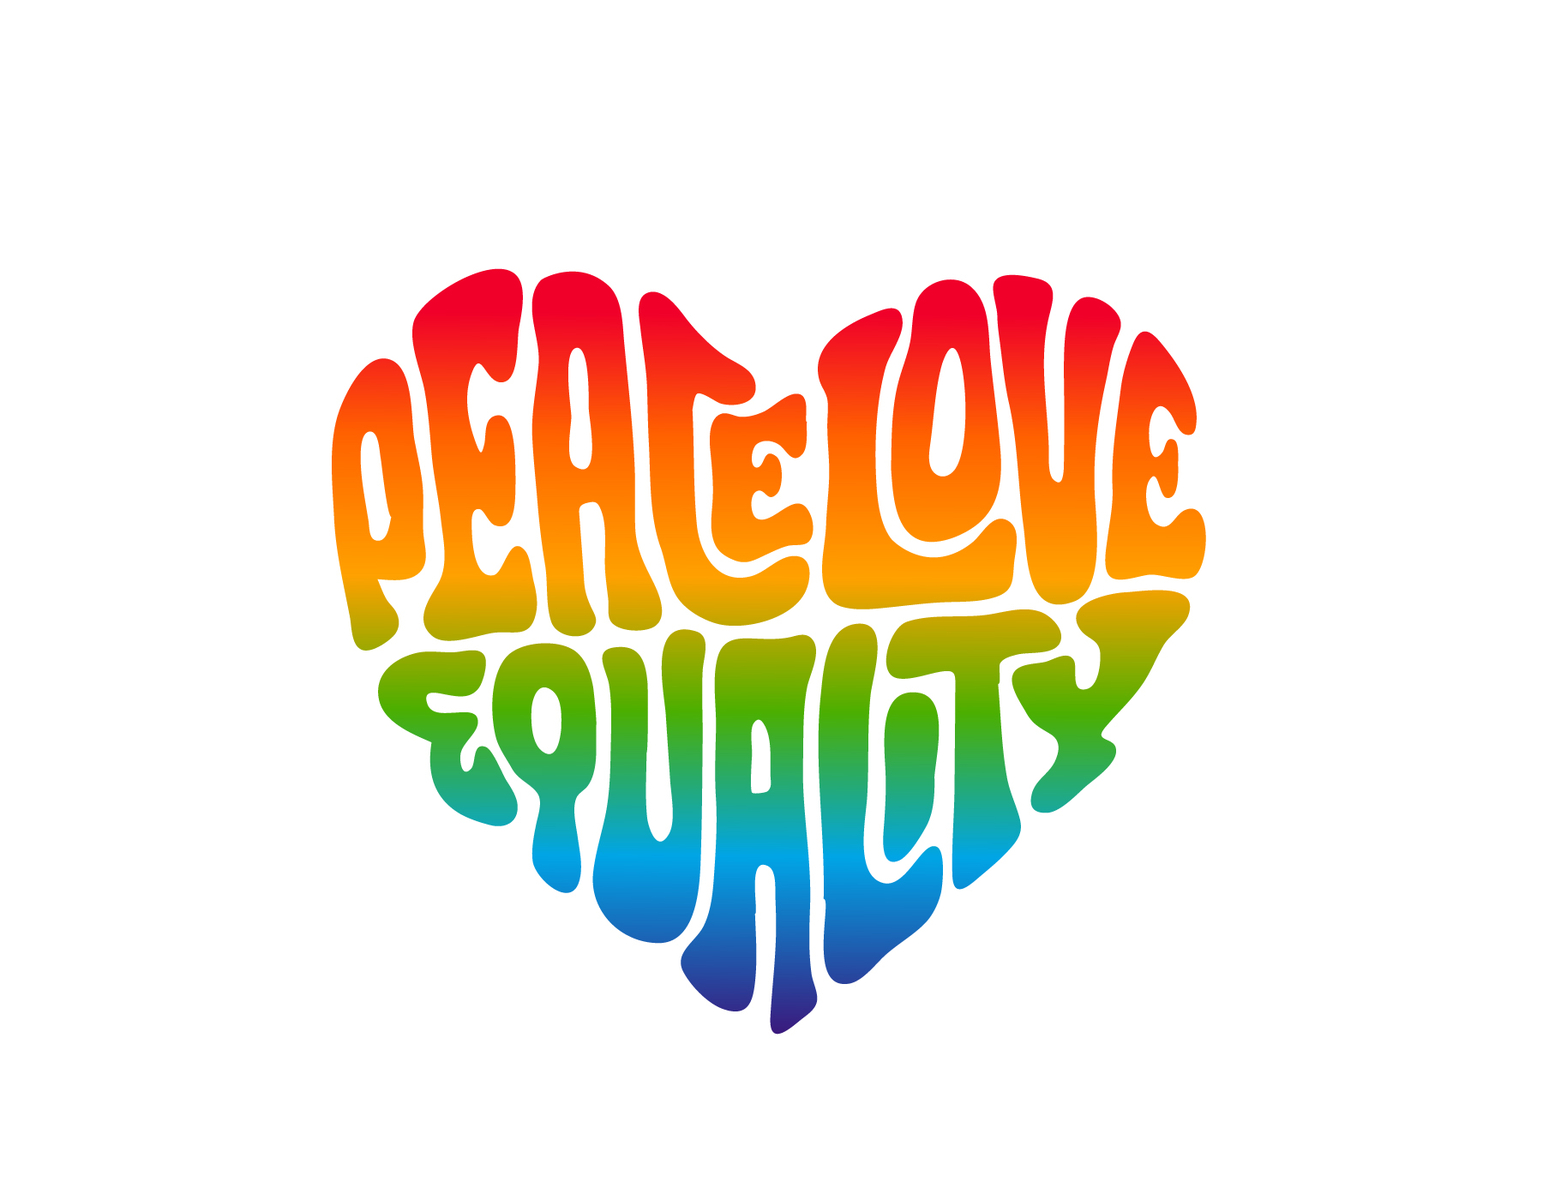 Peace Love Equality by Jerry Okolo on Dribbble